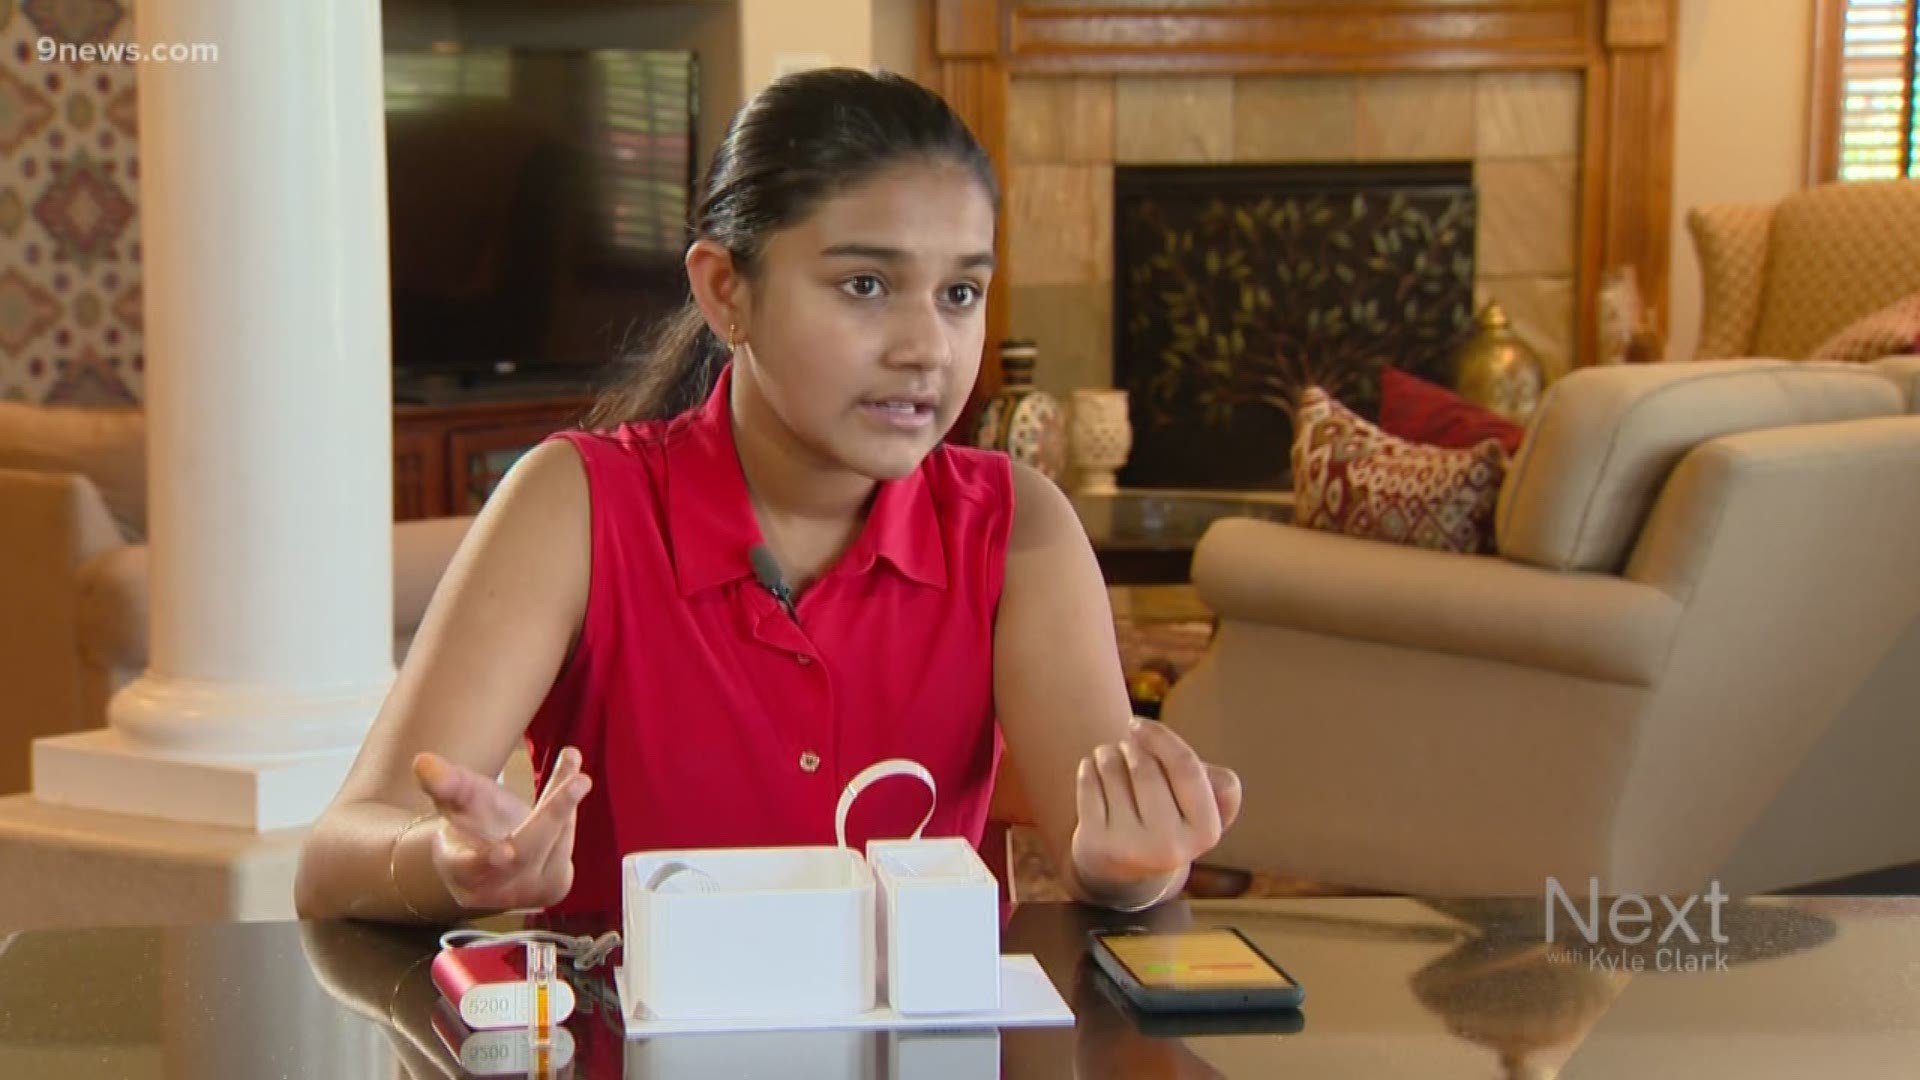 This isn't this 13-year-old's first invention either.